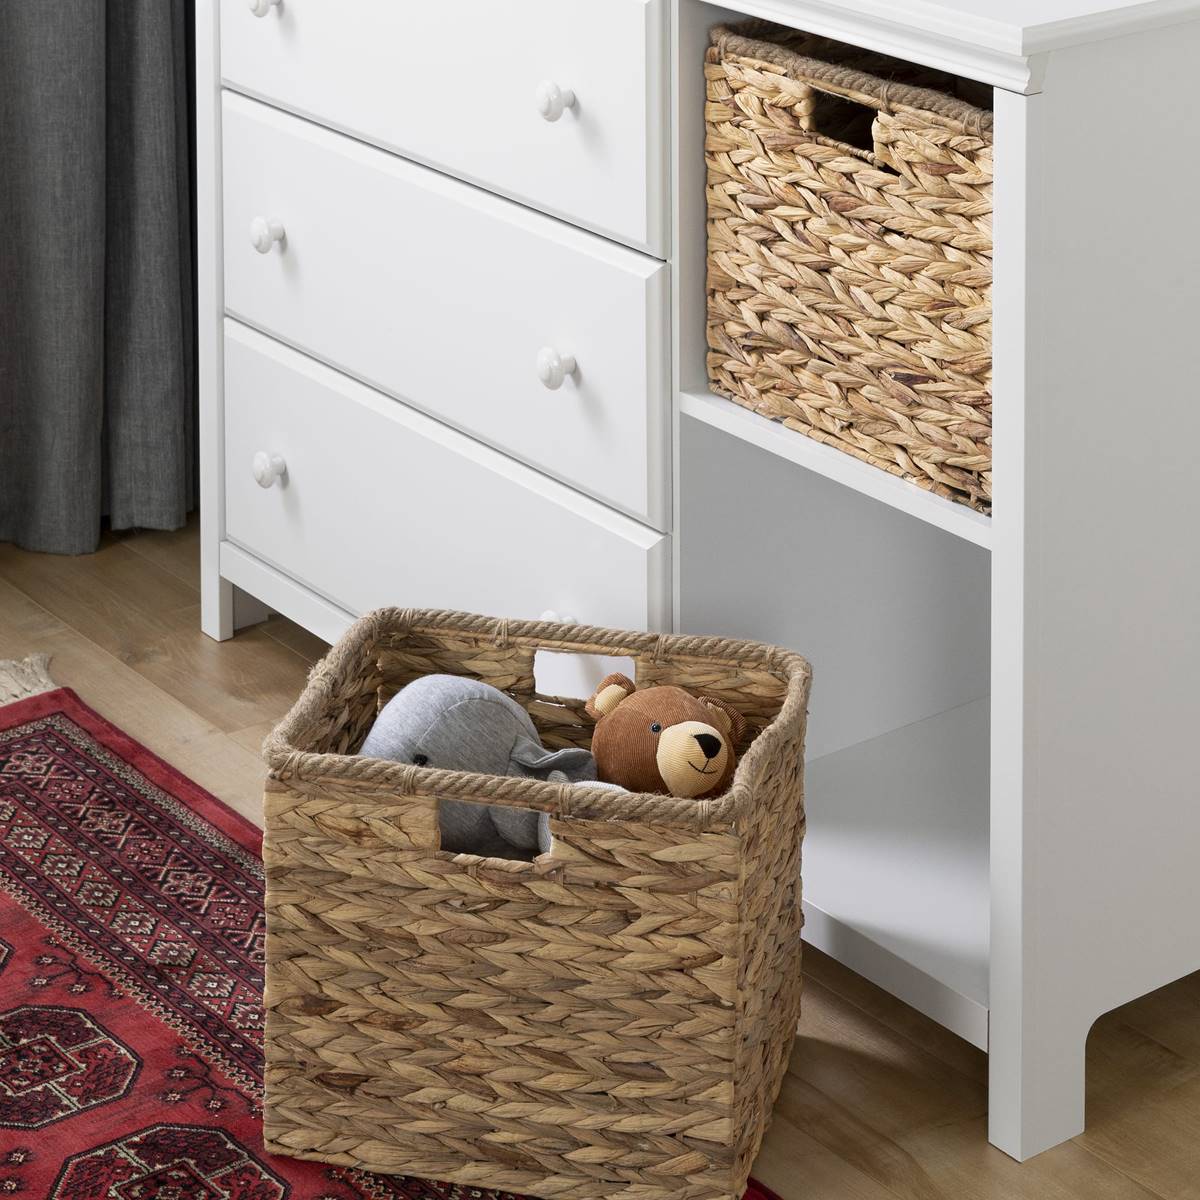 South Shore Cotton Candy Pure White 3-Drawer Dresser W/Baskets